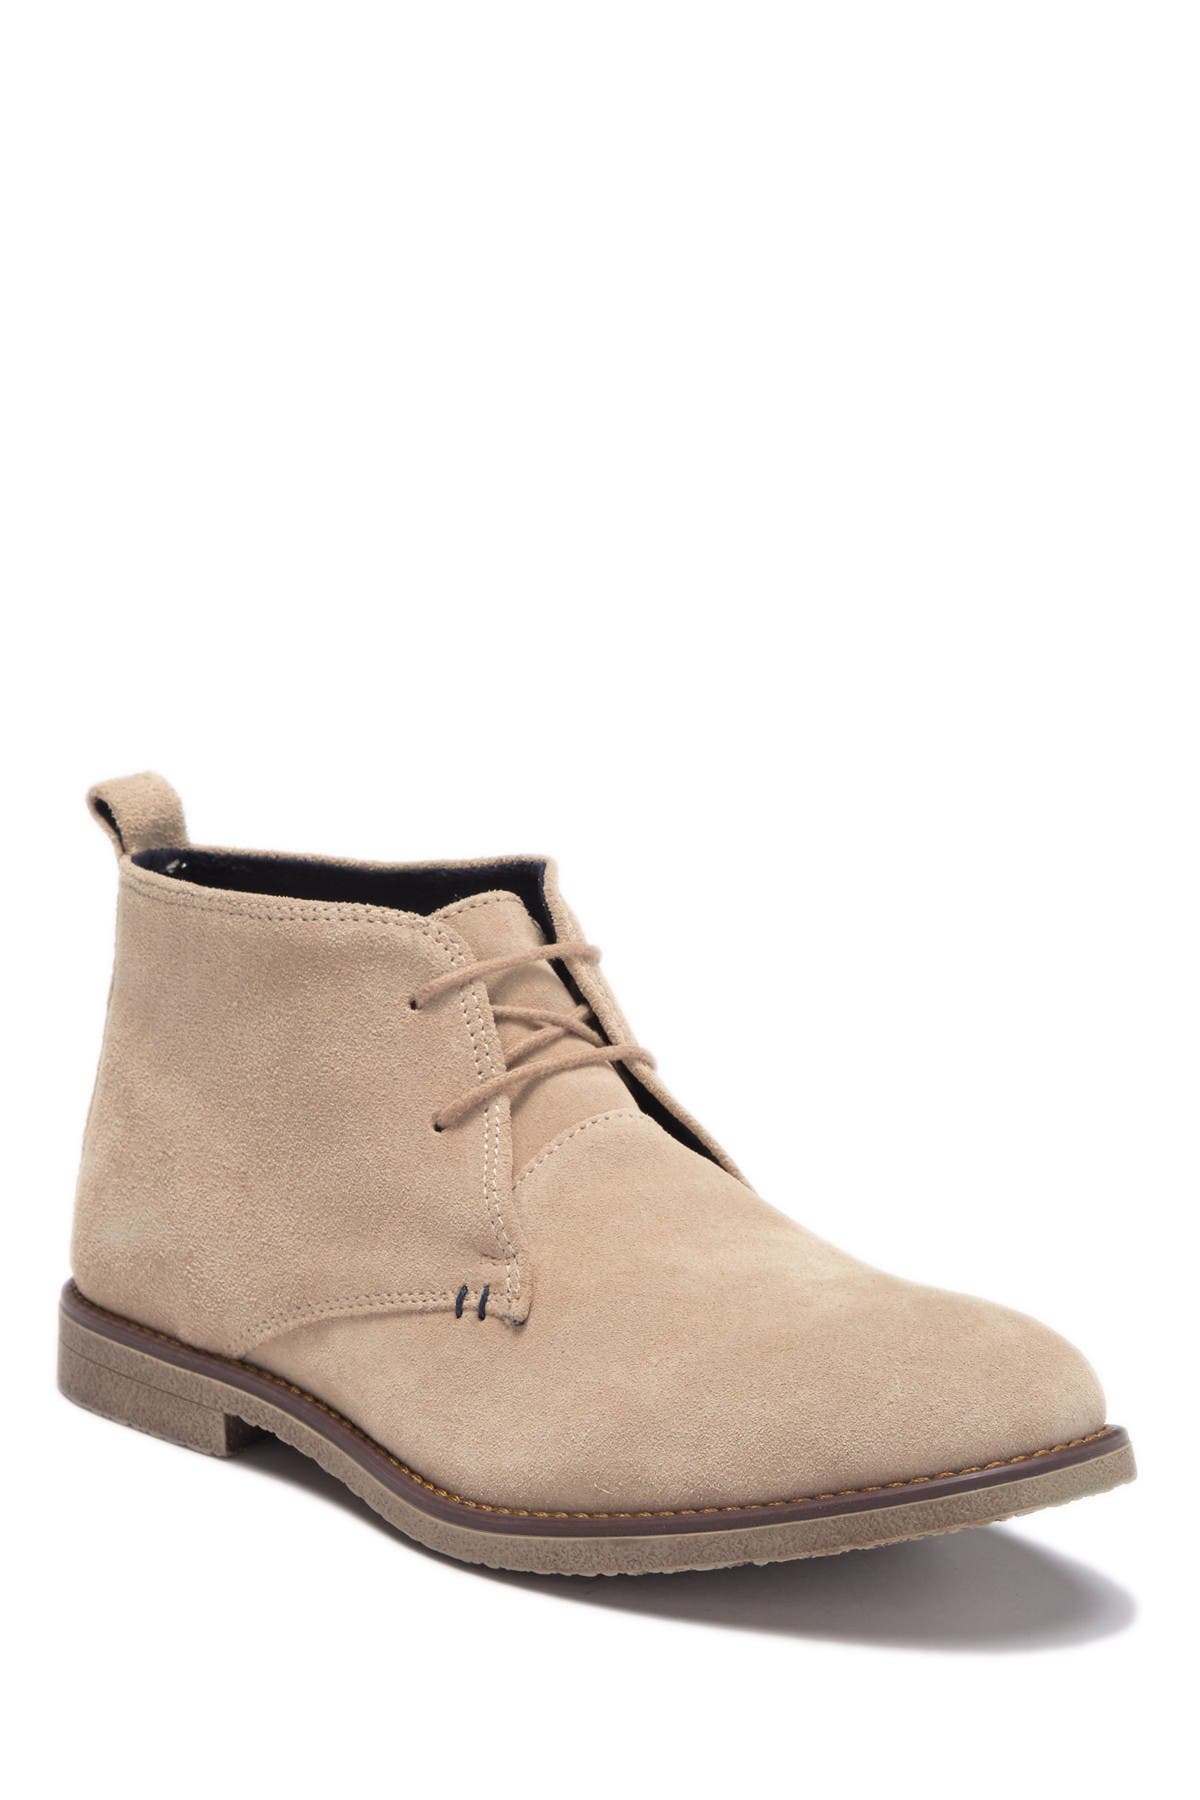 Joseph Abboud | Lucca Suede Chukka Boot 